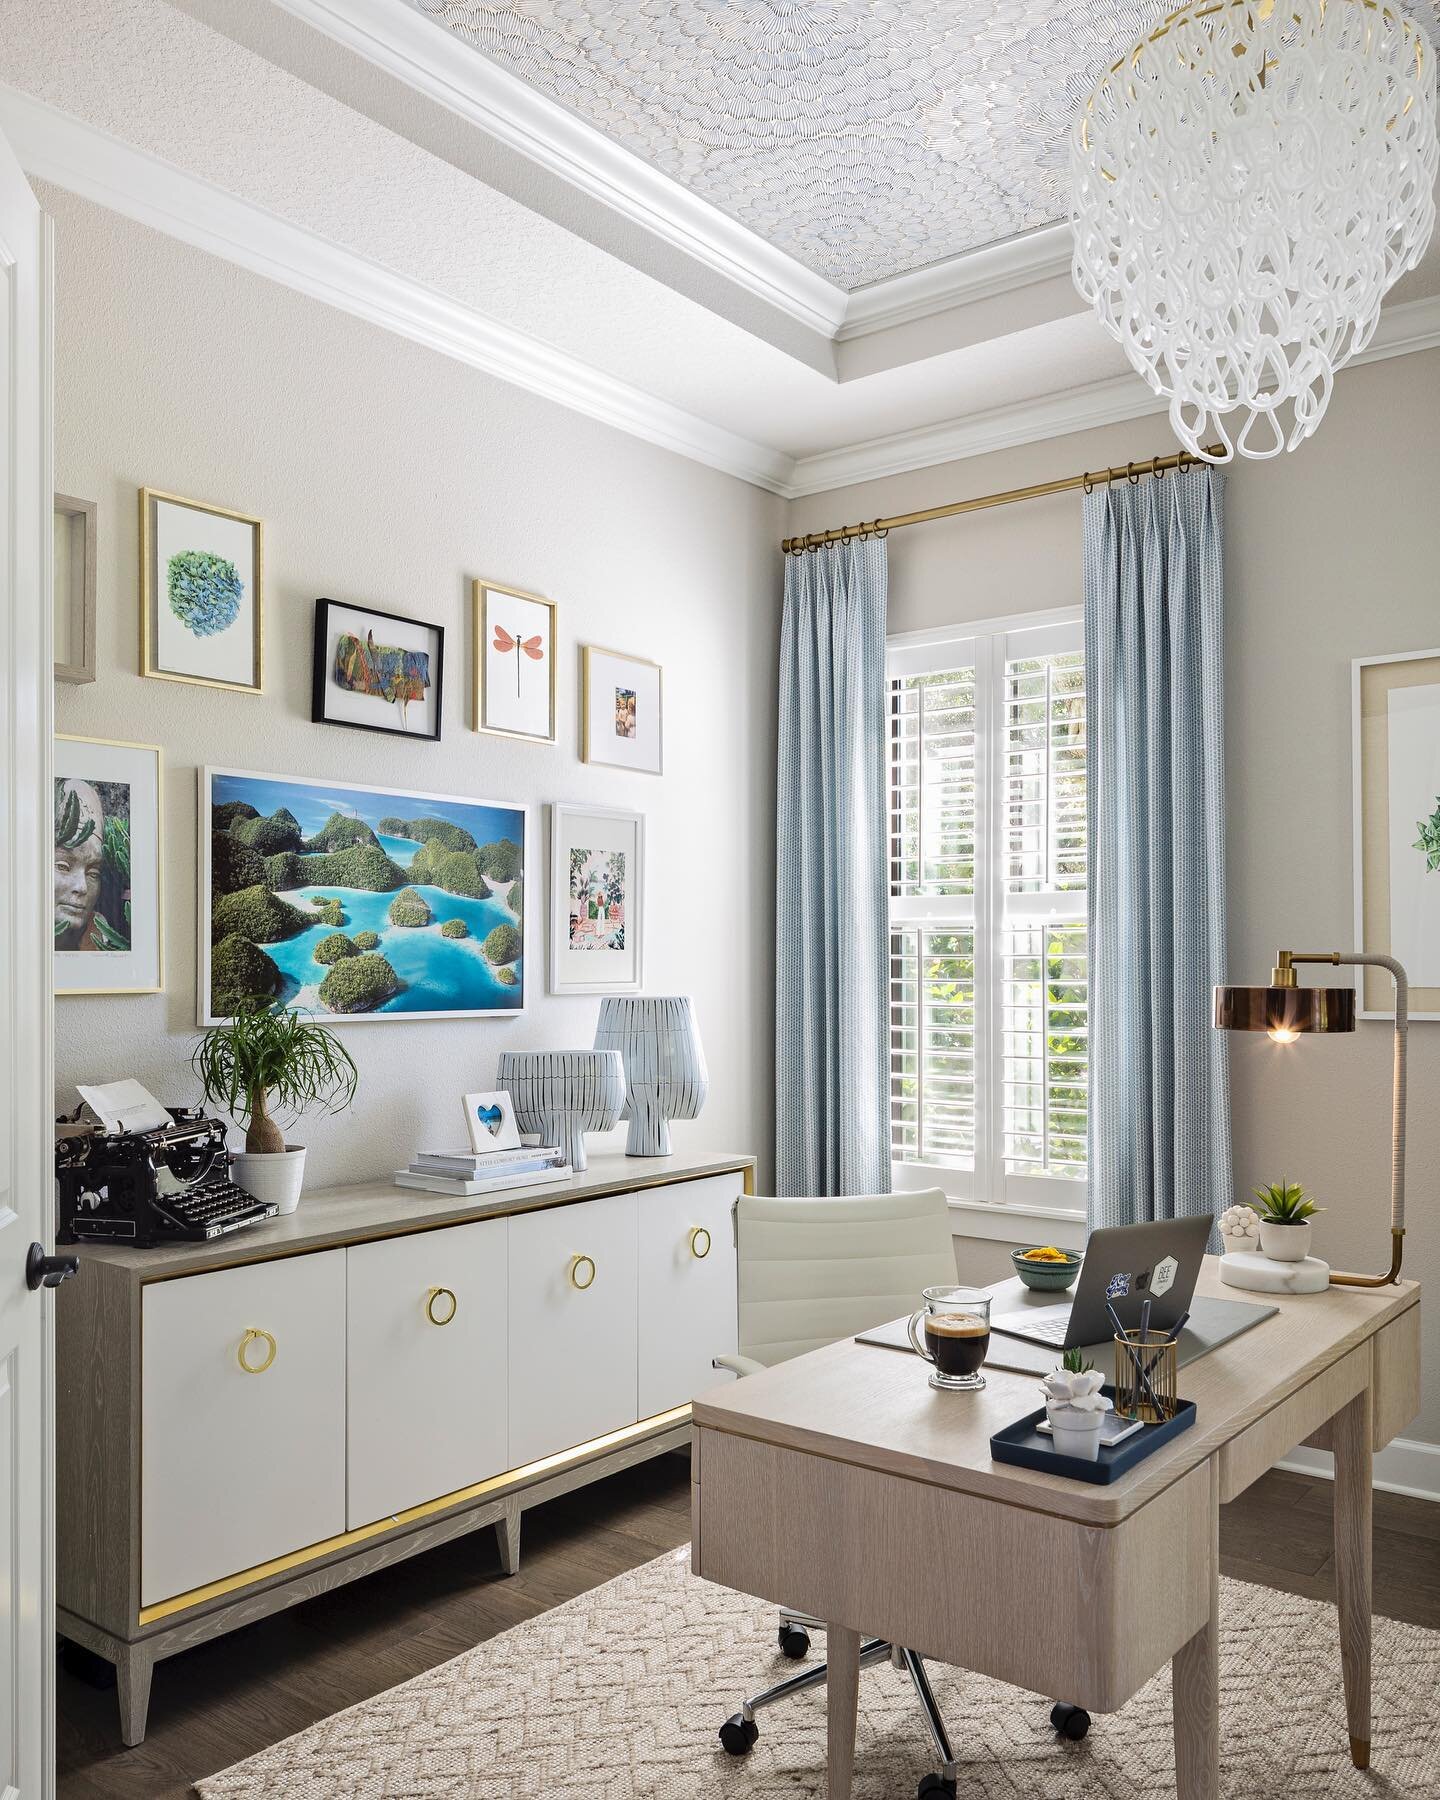 ✨HER OFFICE✨A home office can be so much more than just a work space.  It can be a calming retreat and mom-den, too! We created an artfully curated gallery wall with Samsung frame TV, a beautiful credenza for storage, an elegant Executive desk, and a